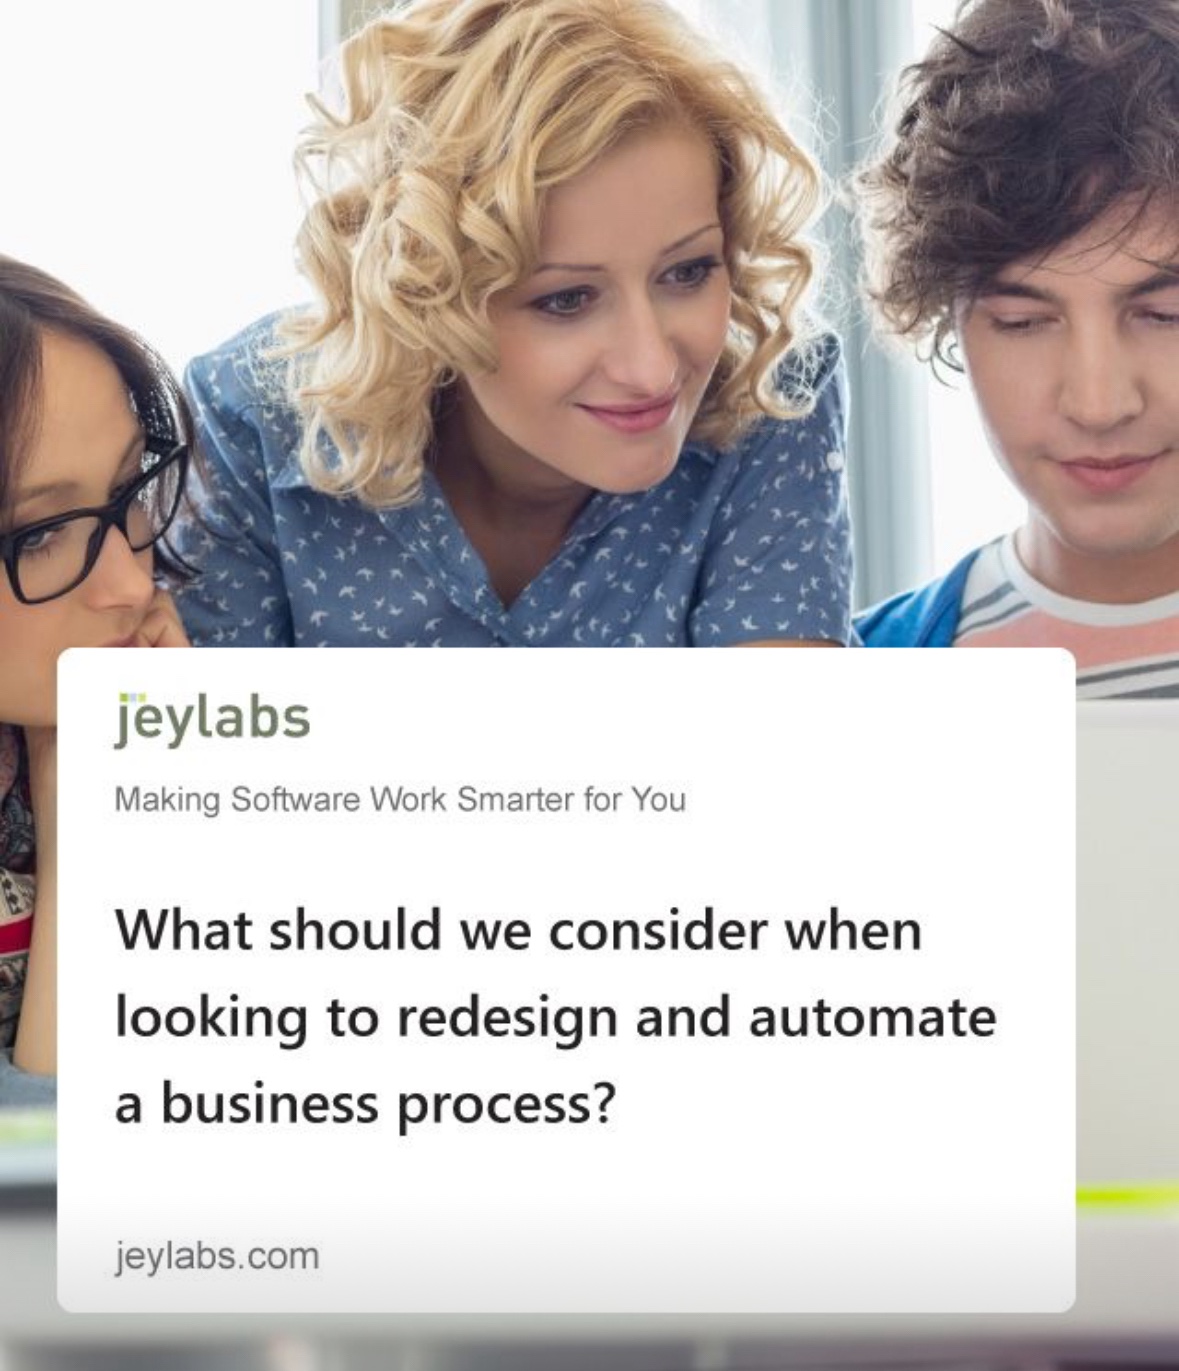 What should you consider when redesigning a business process?